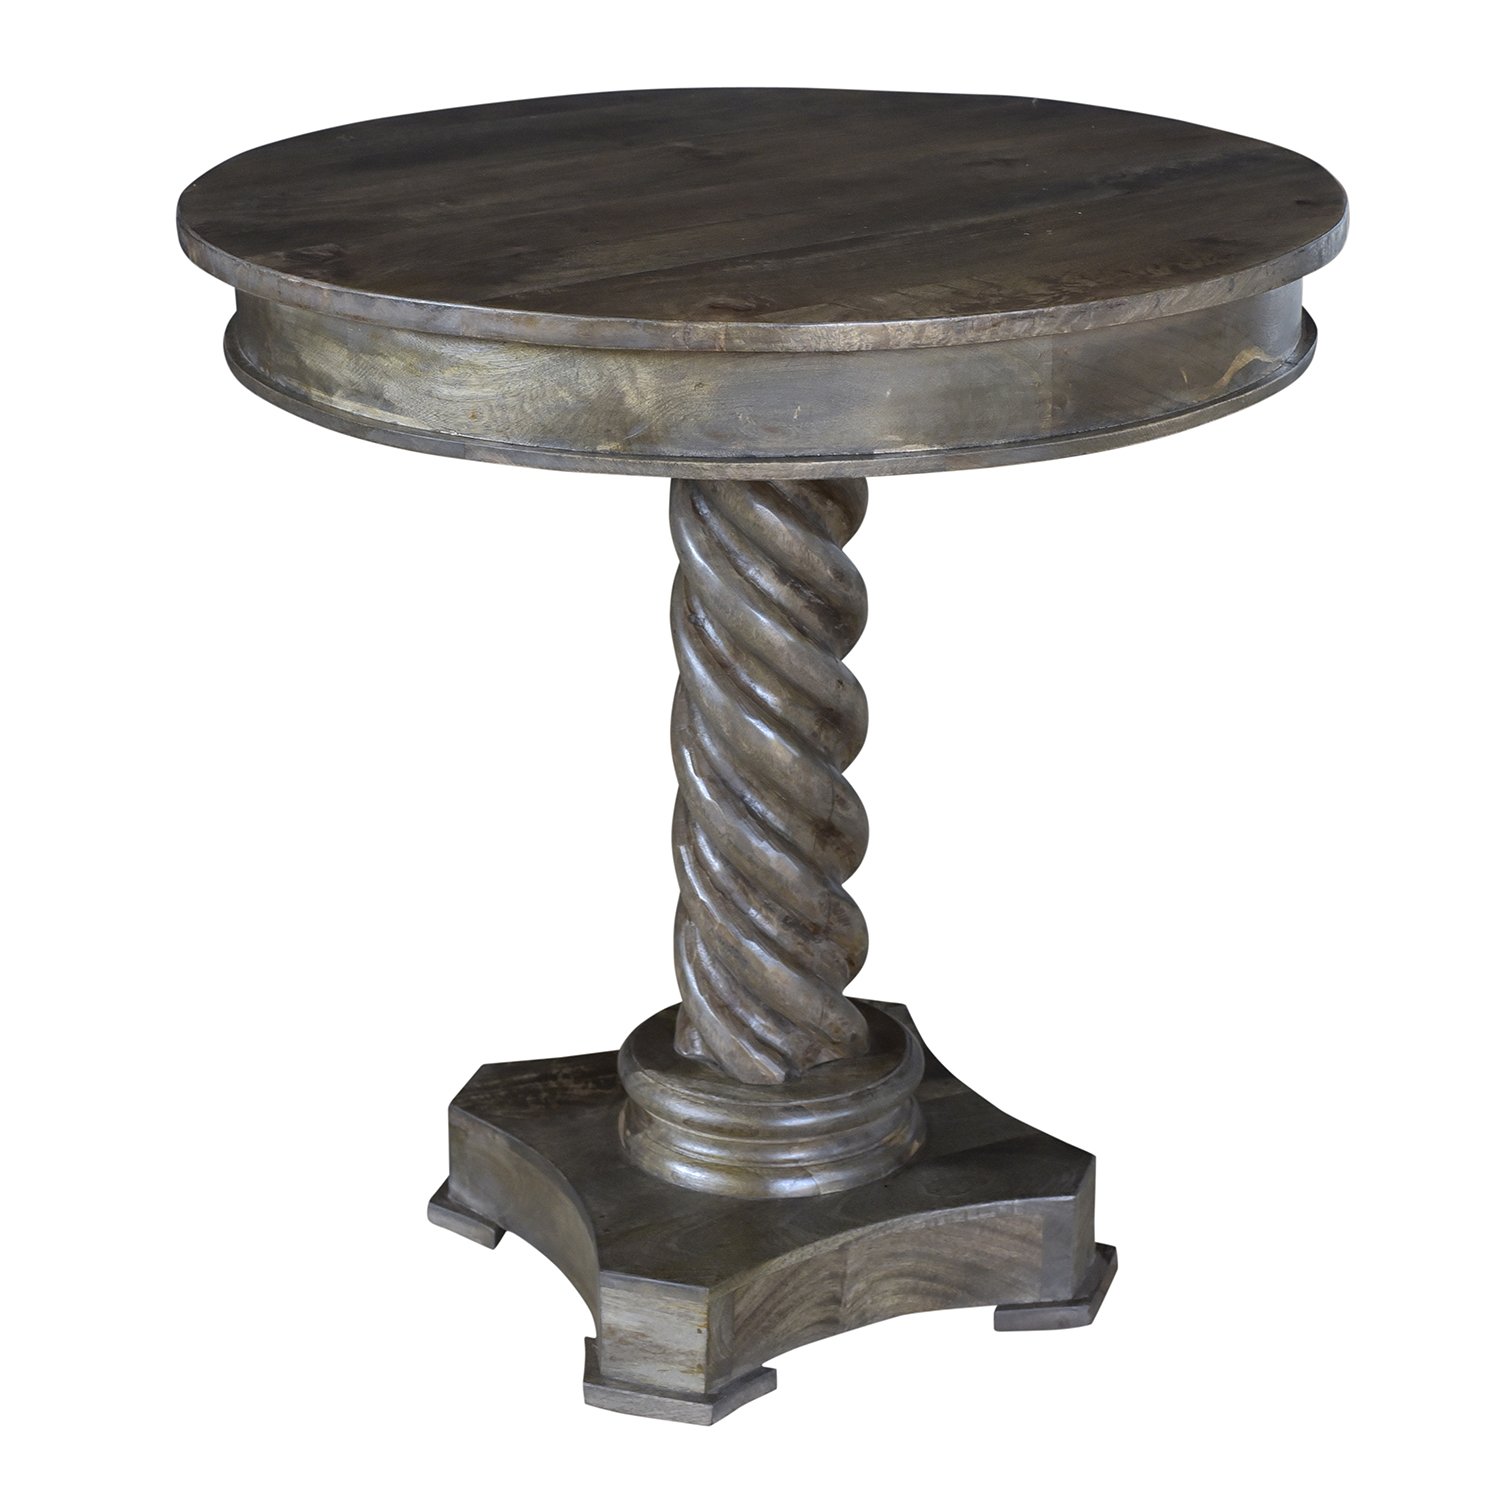 bengal manor mango wood carved rope twist pedestal accent table kitchen dining silver metal and glass coffee carpet threshold pier one imports rugs counter decorative inch round